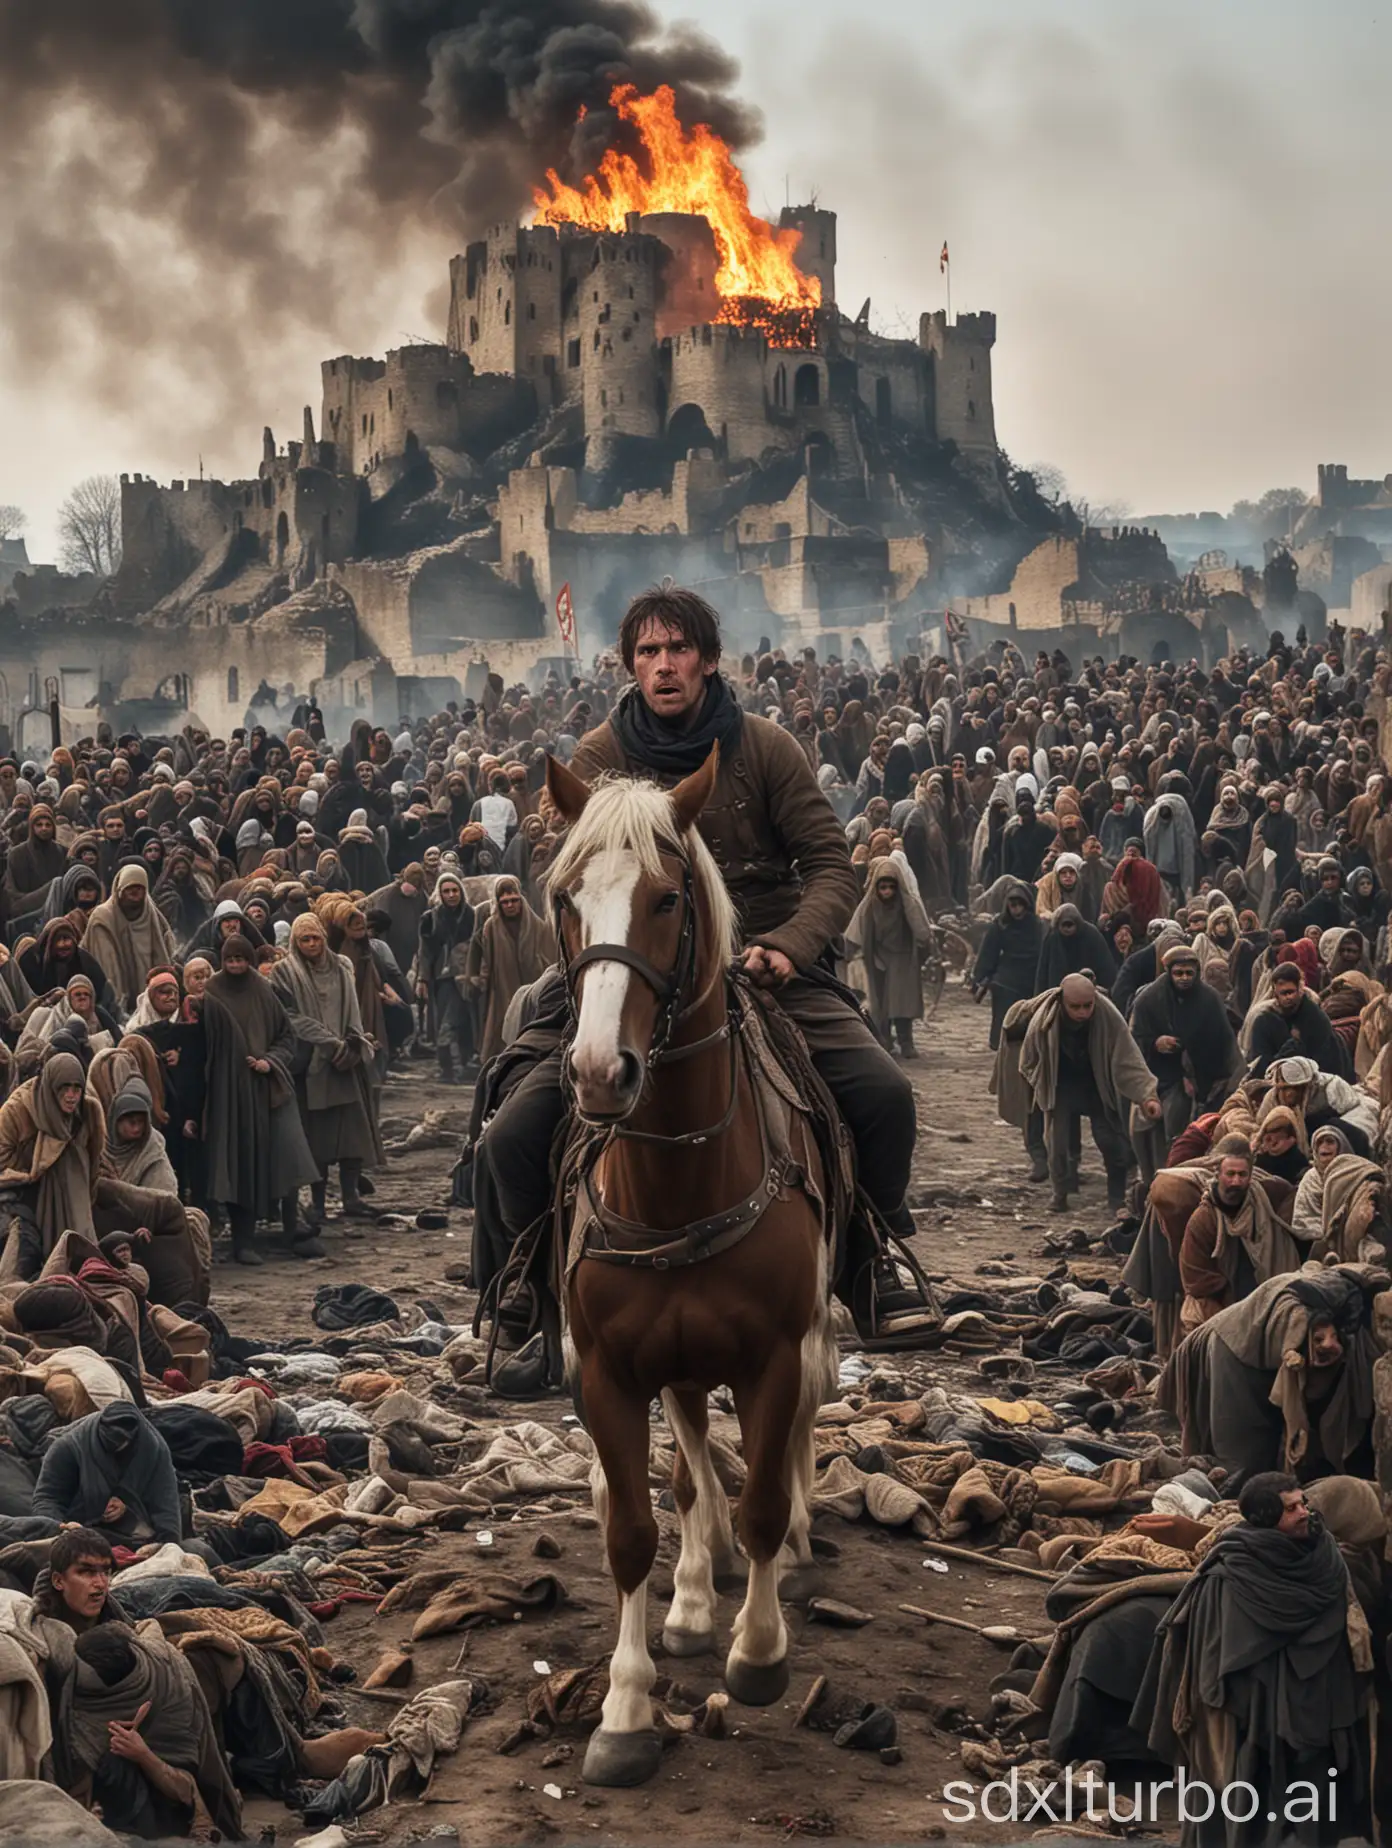 Courageous-Knight-Riding-Amidst-Struggling-Villagers-with-a-Fiery-Castle-Background